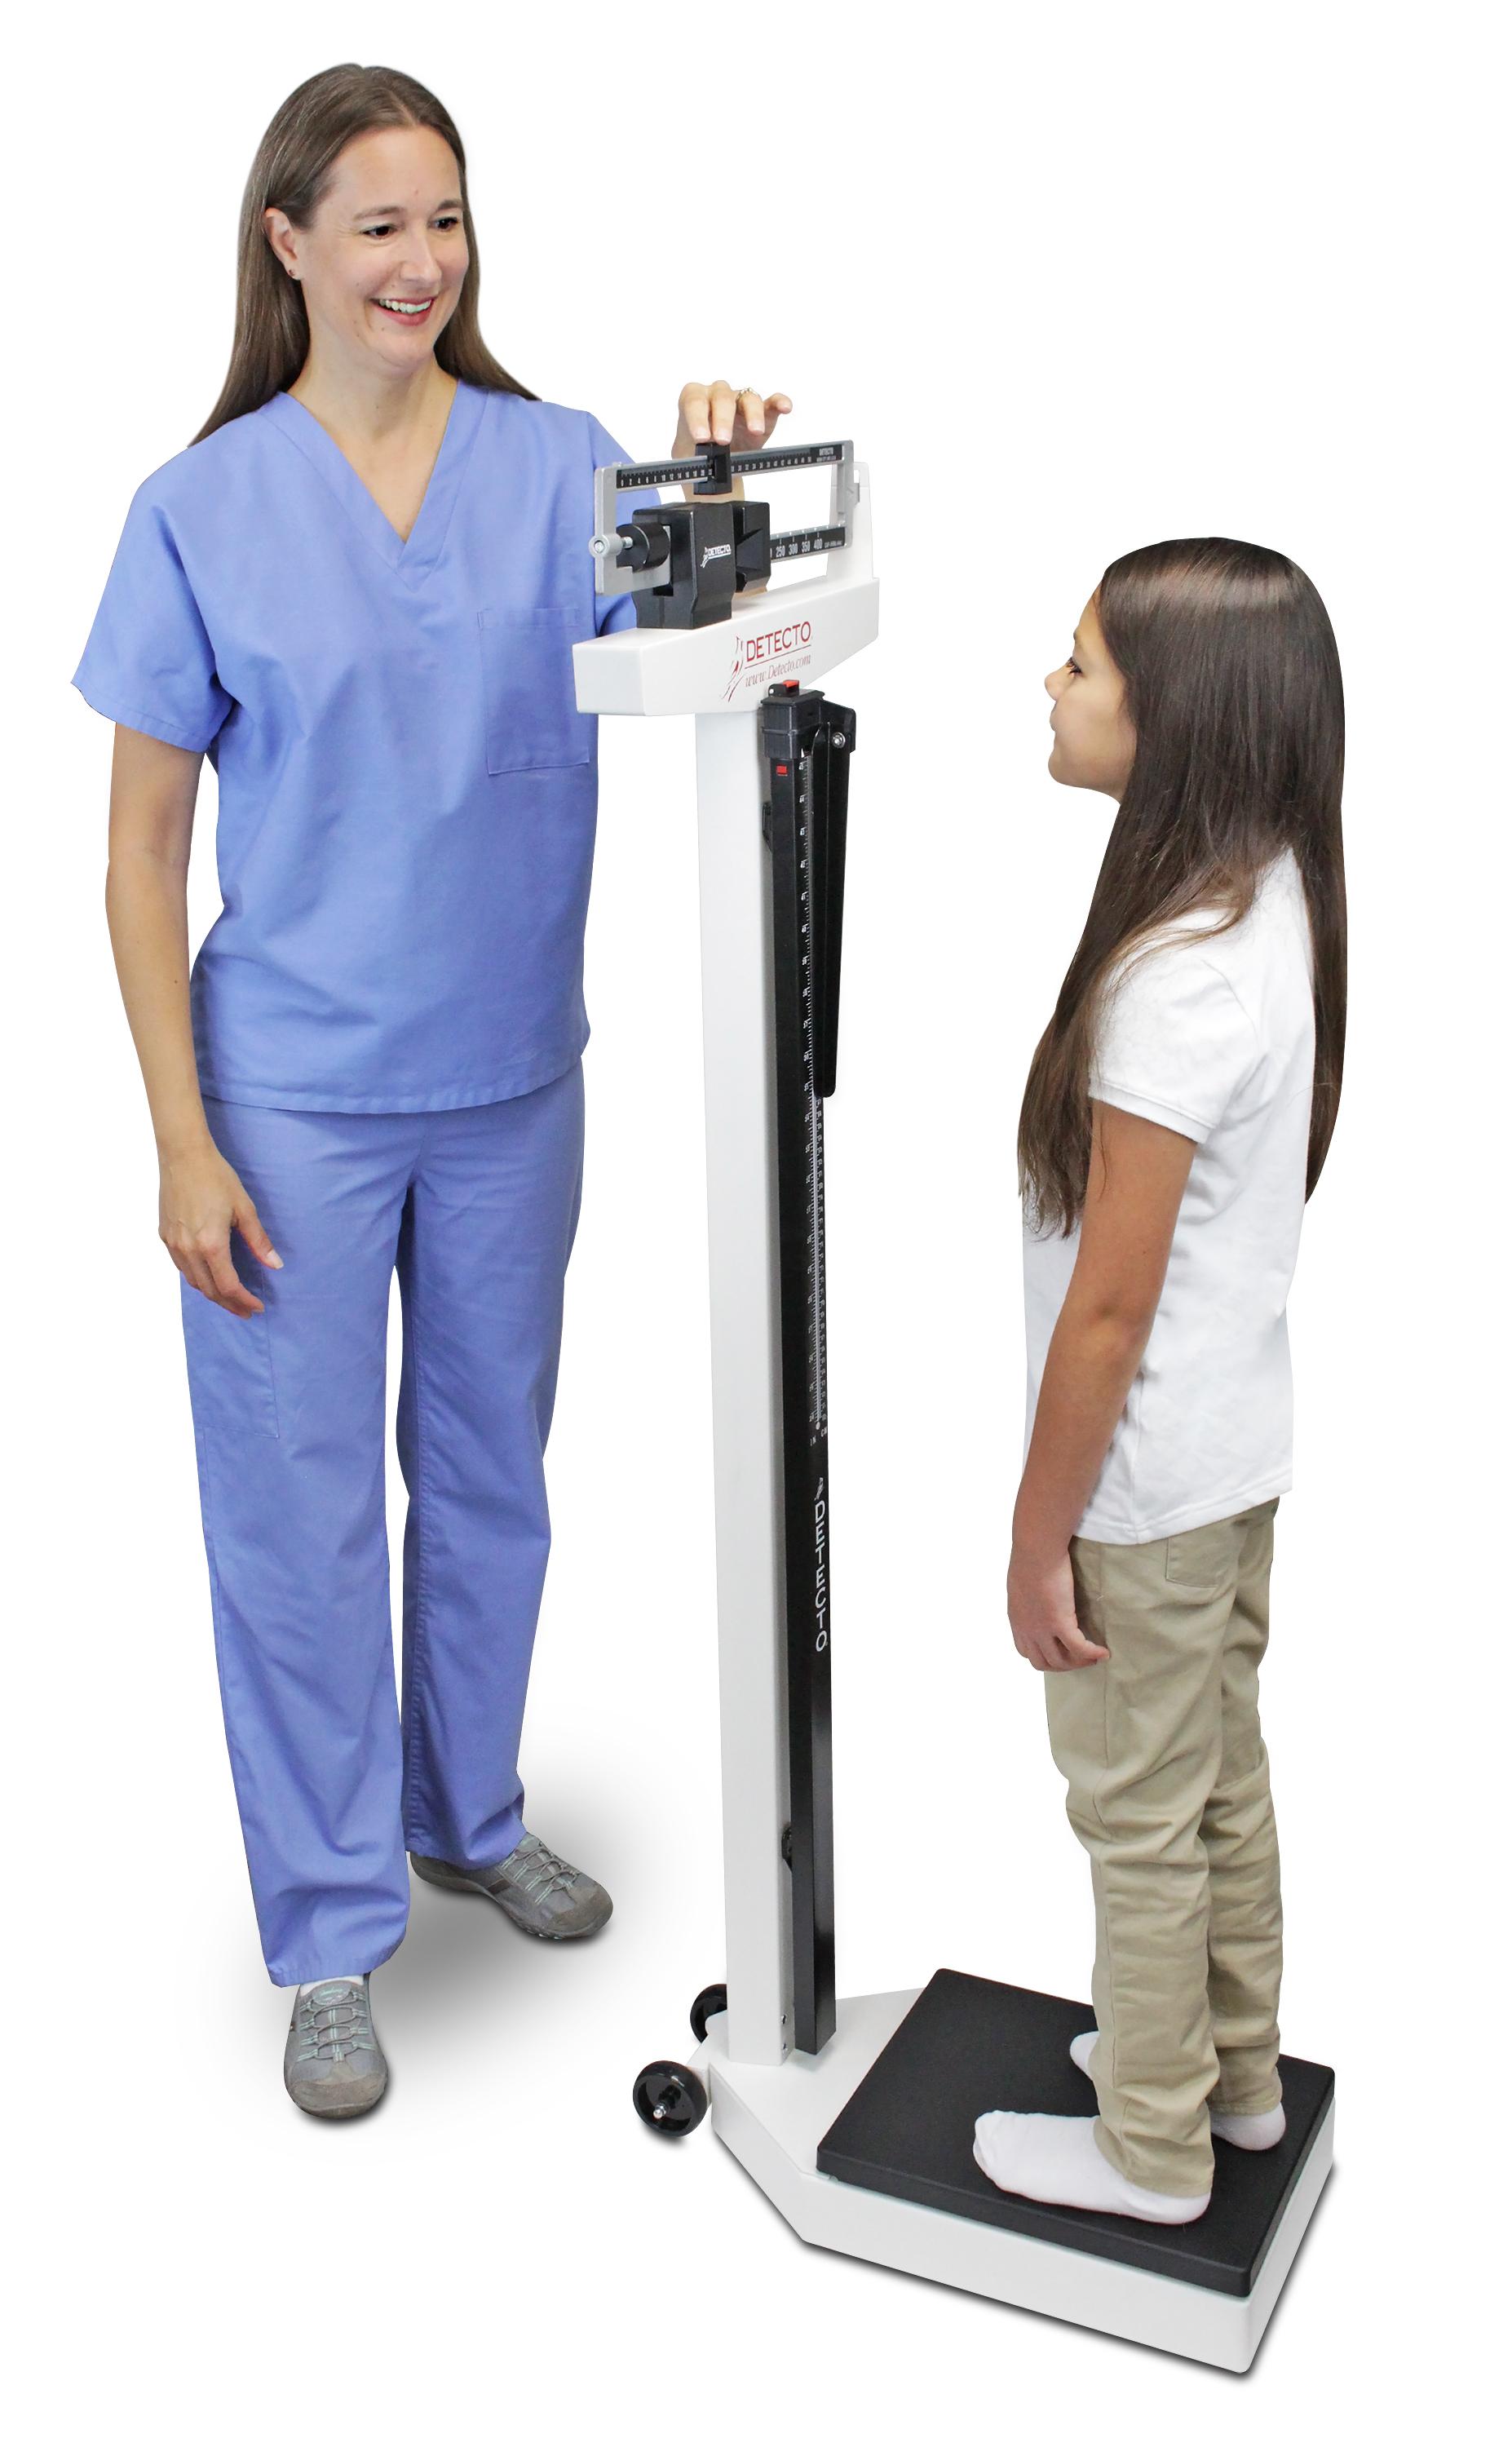 Eye-Level Physician Scale - Weighs in lbs